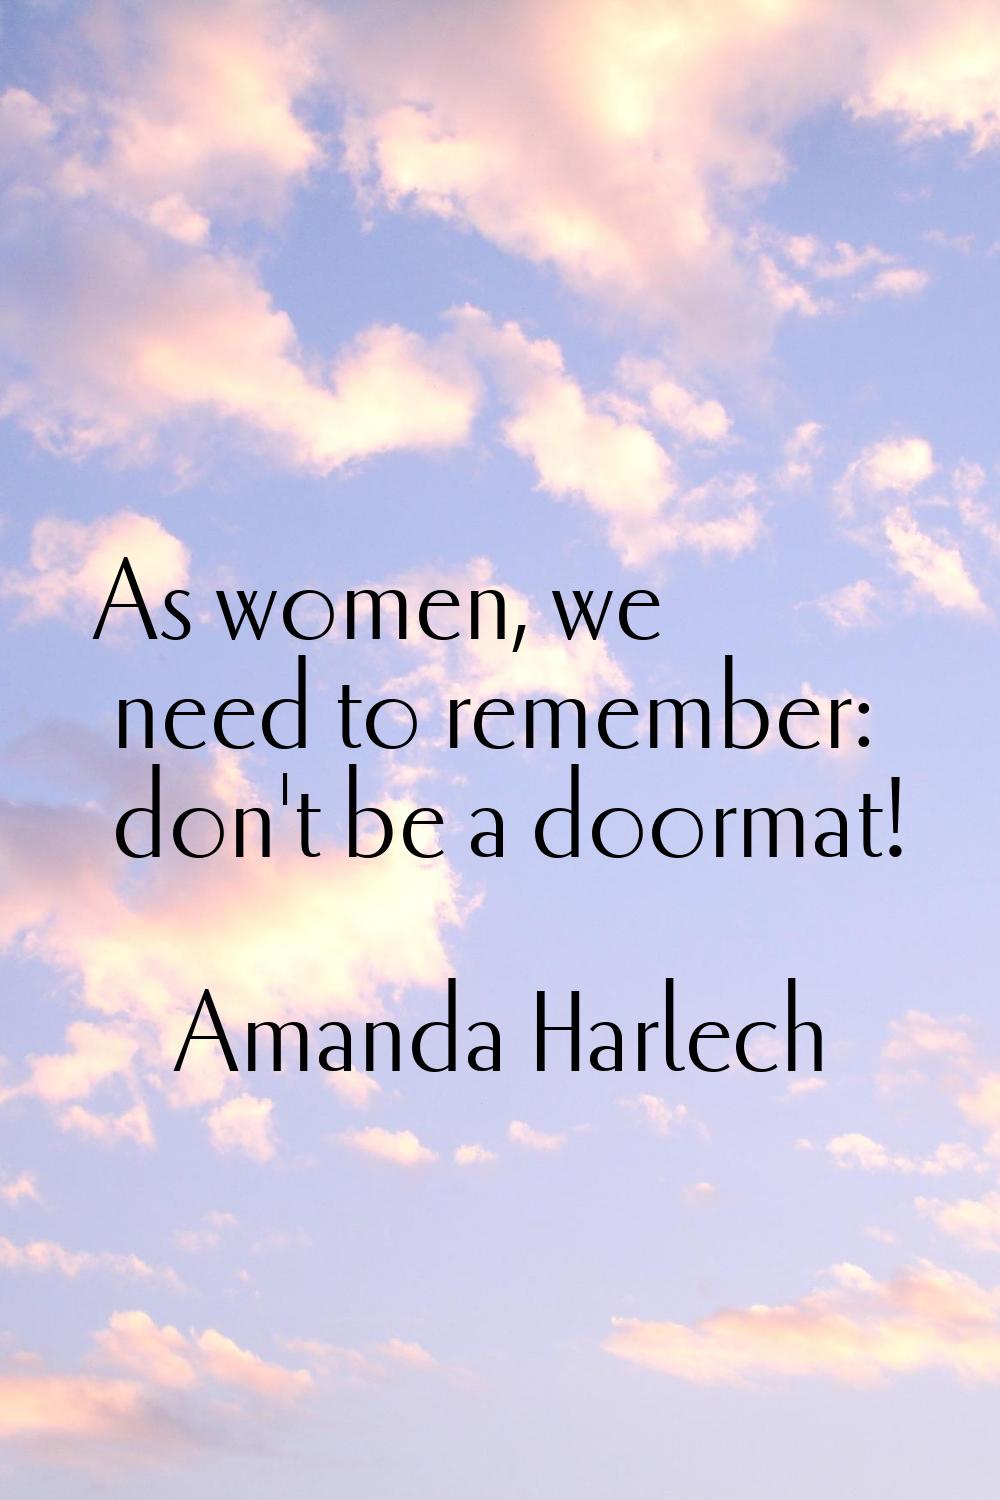 As women, we need to remember: don't be a doormat!